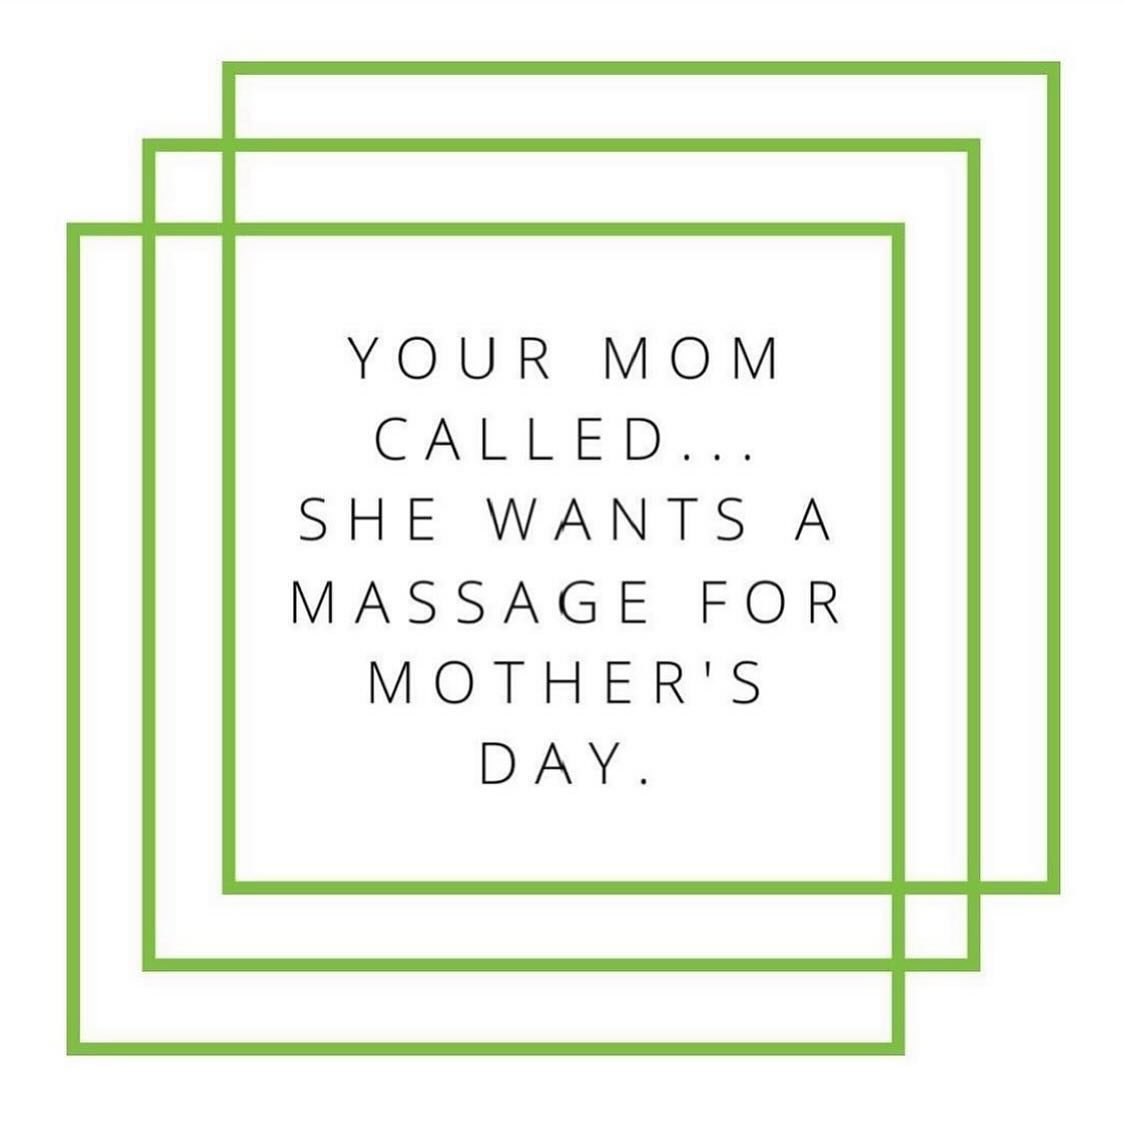 She really does. Head to our website or stop by the spa today to pick up OASIS gift cards for the mothers in your life. 💚